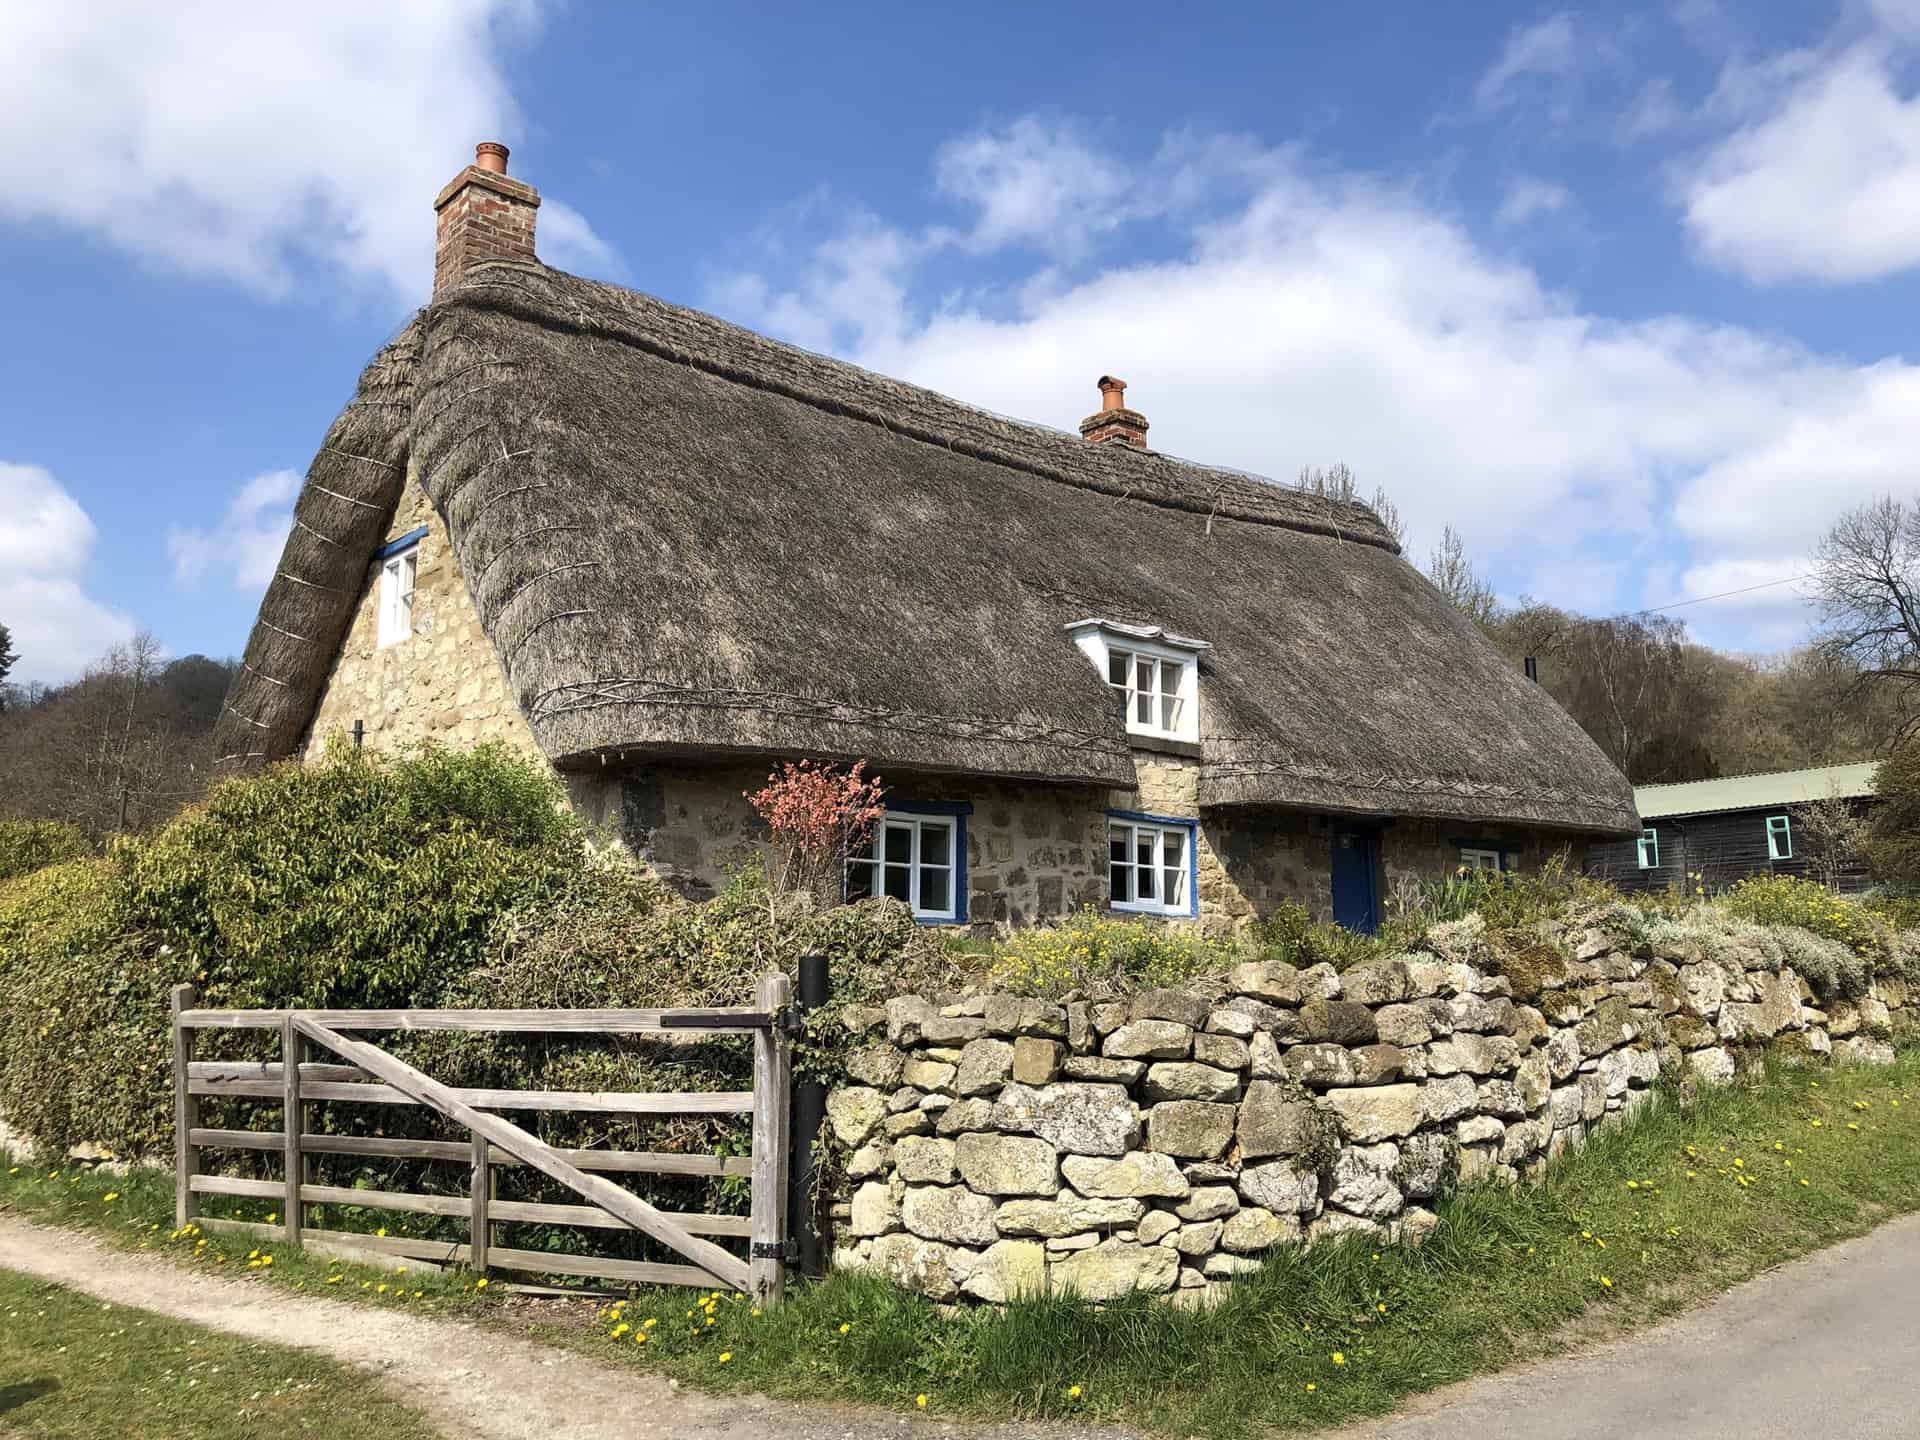 Thatched cottage in Rievaulx seen by Richard Coles in BBC Winter Walks S1E5.